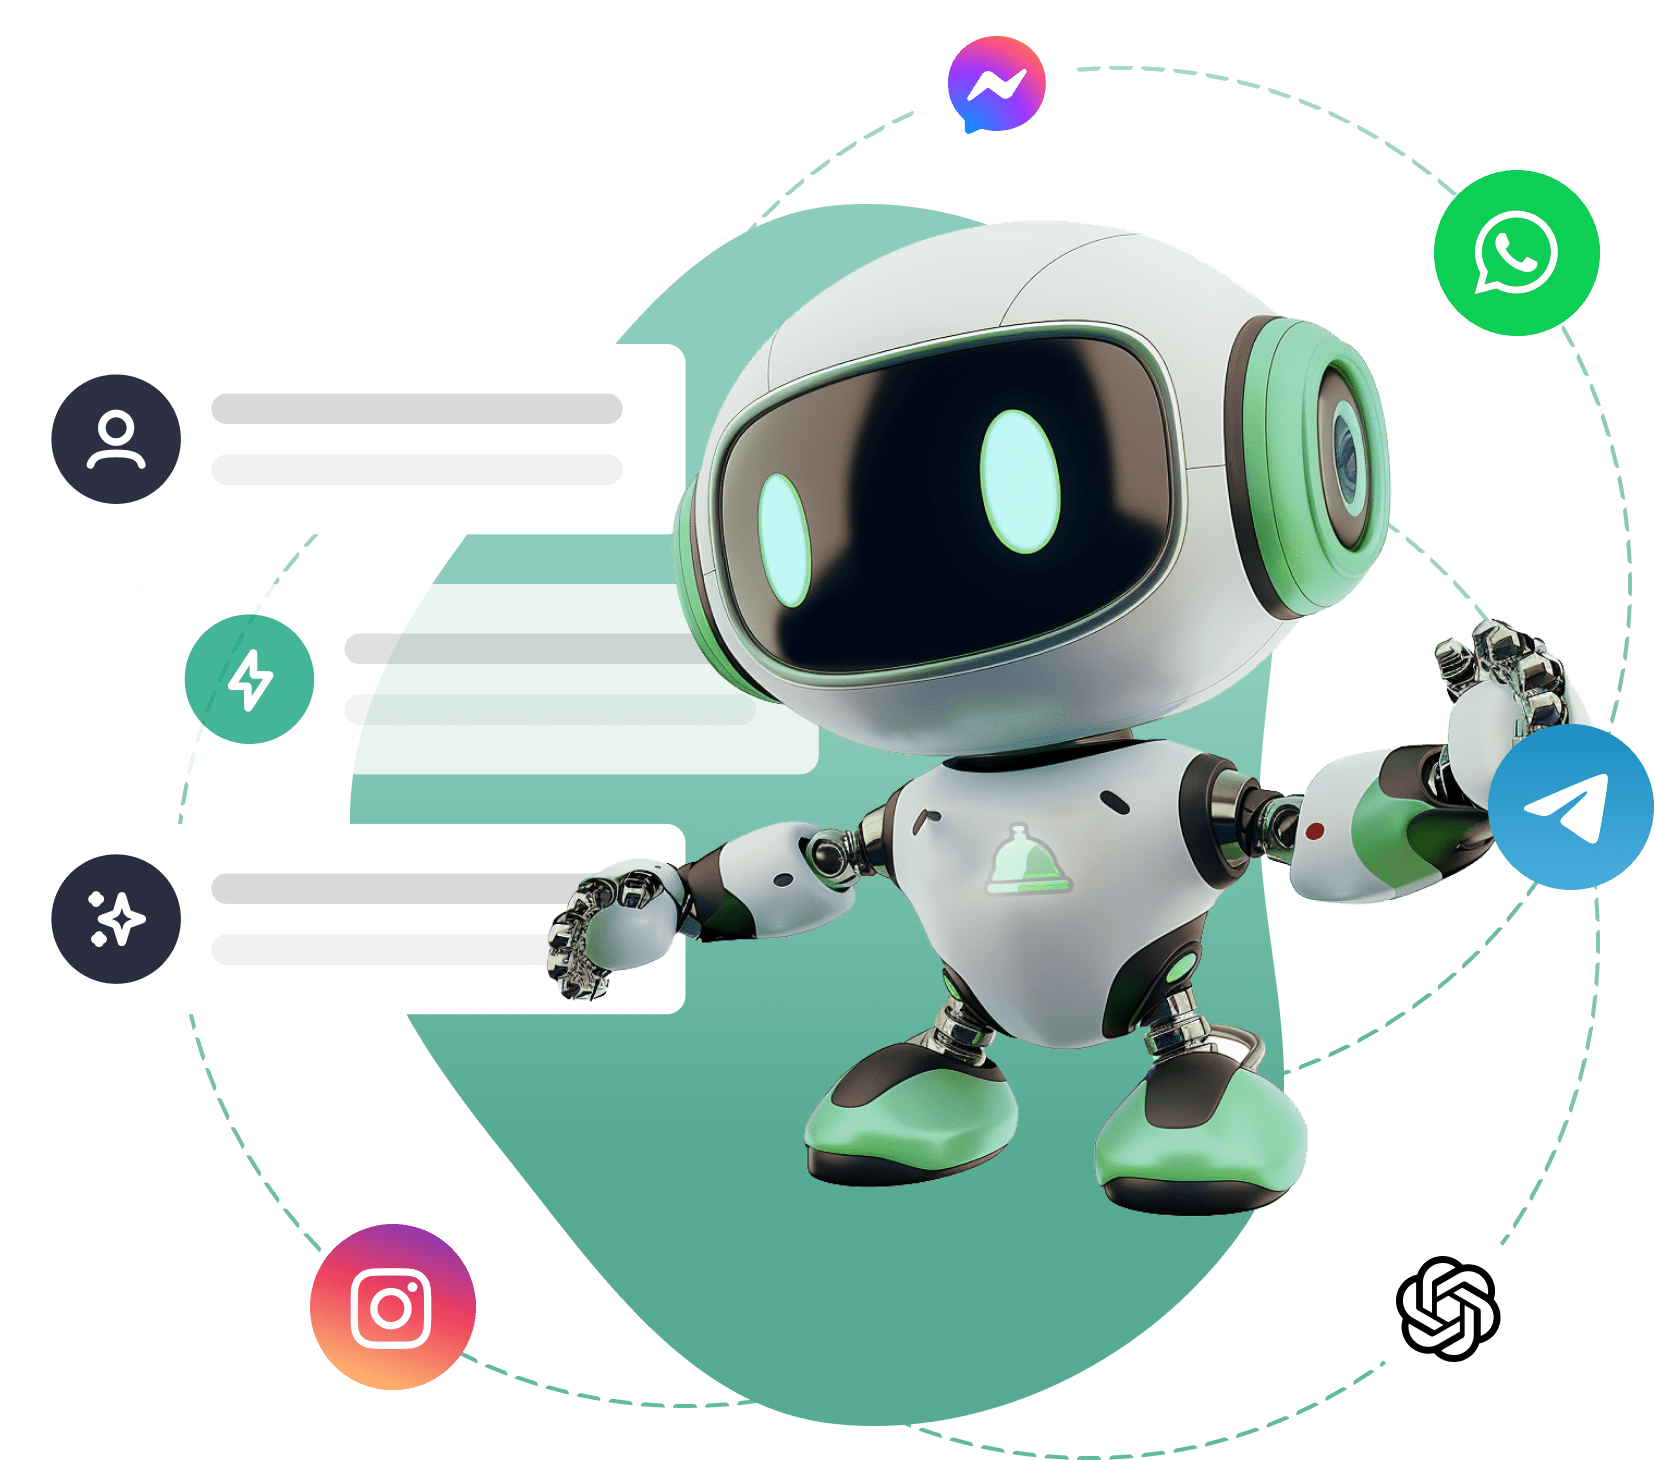 Create your Chatbot